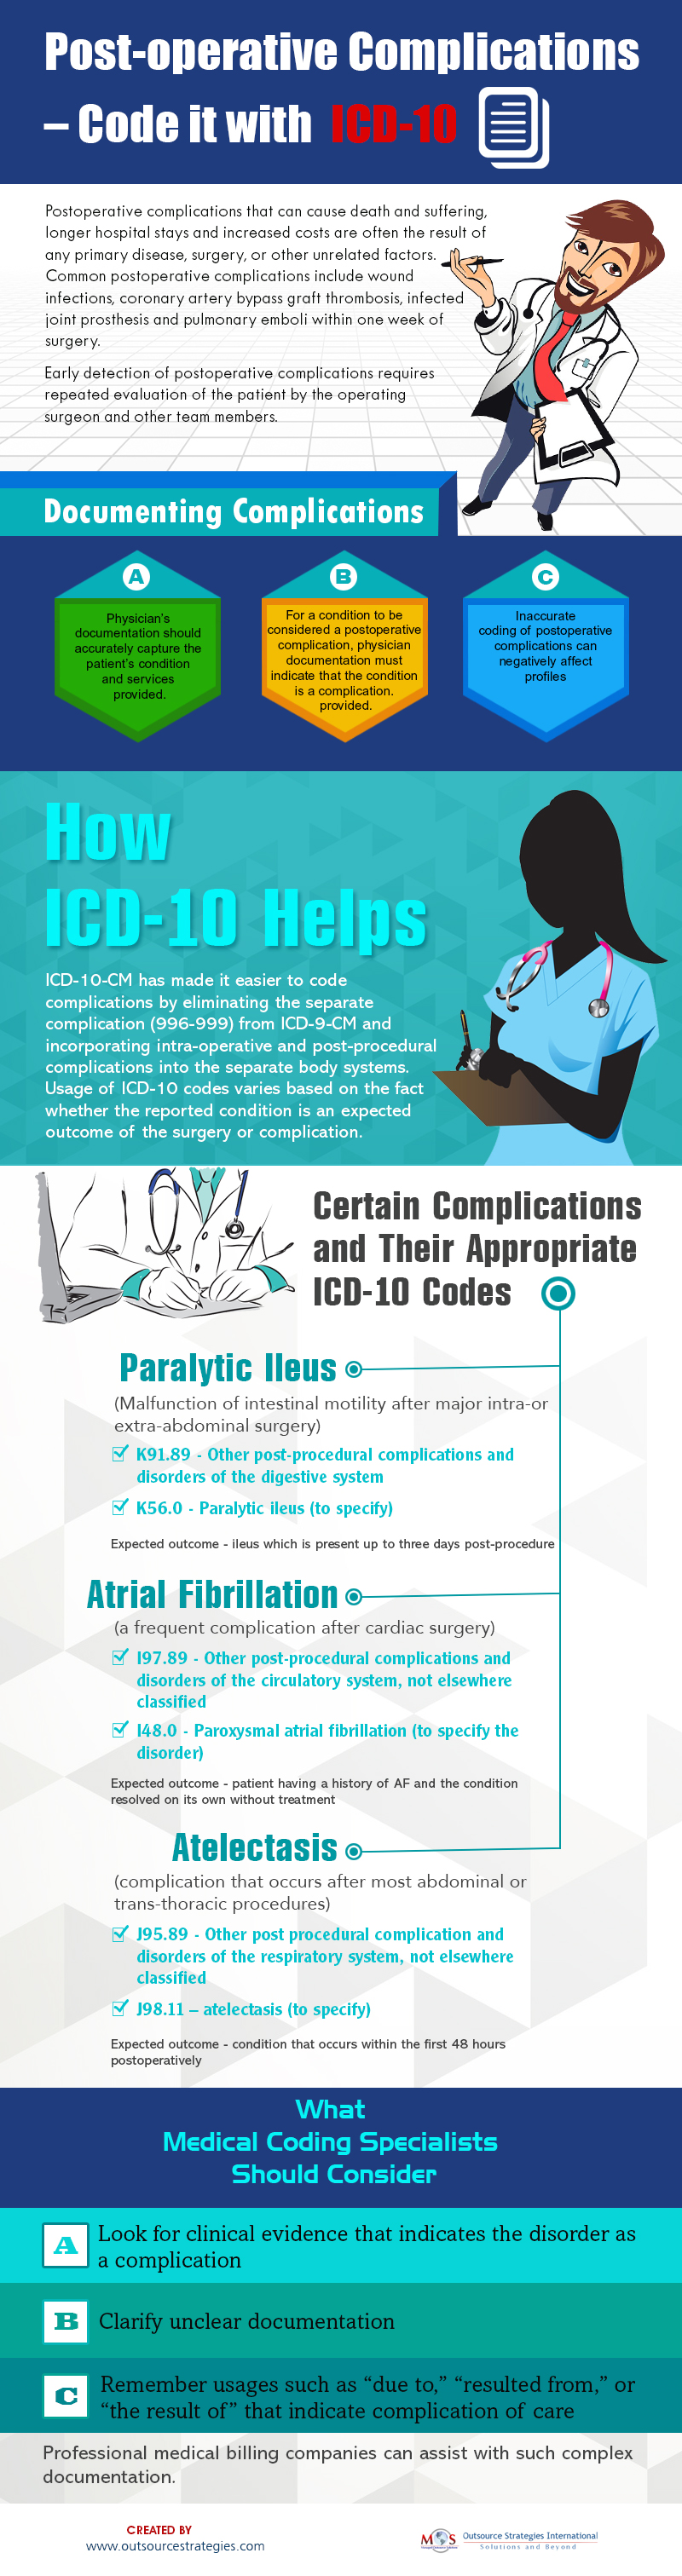 Post-operative Complications Code it with ICD-10